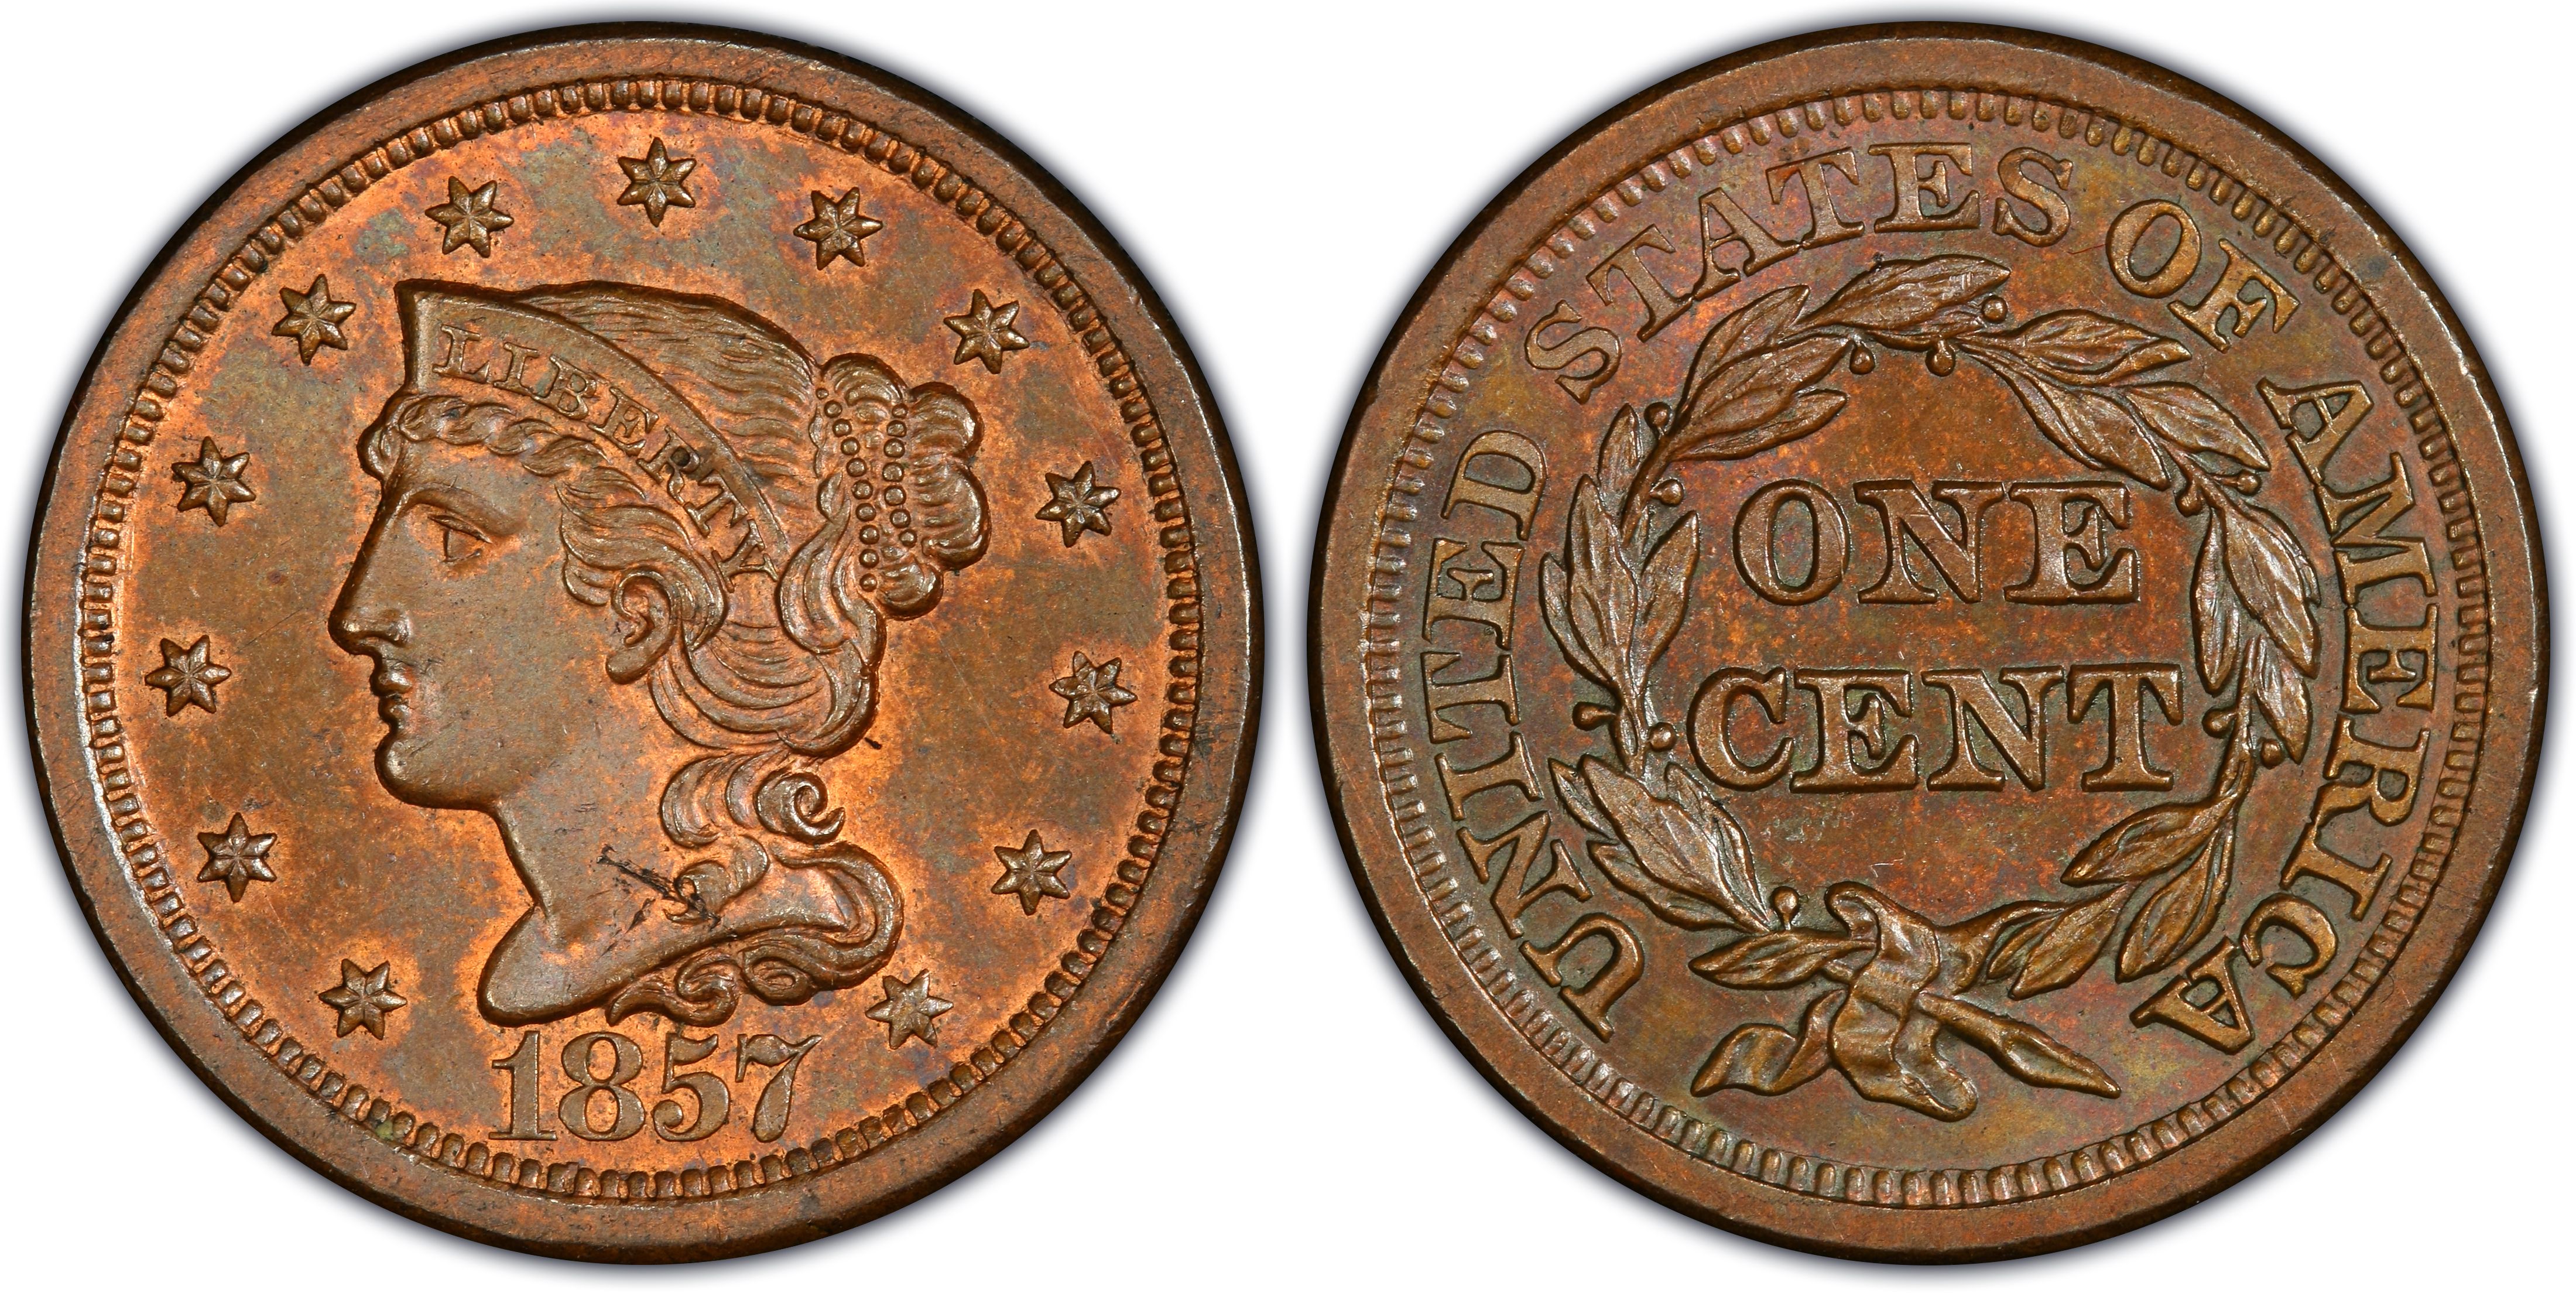 https://images.pcgs.com/CoinFacts/14562435_1360291_2200.jpg